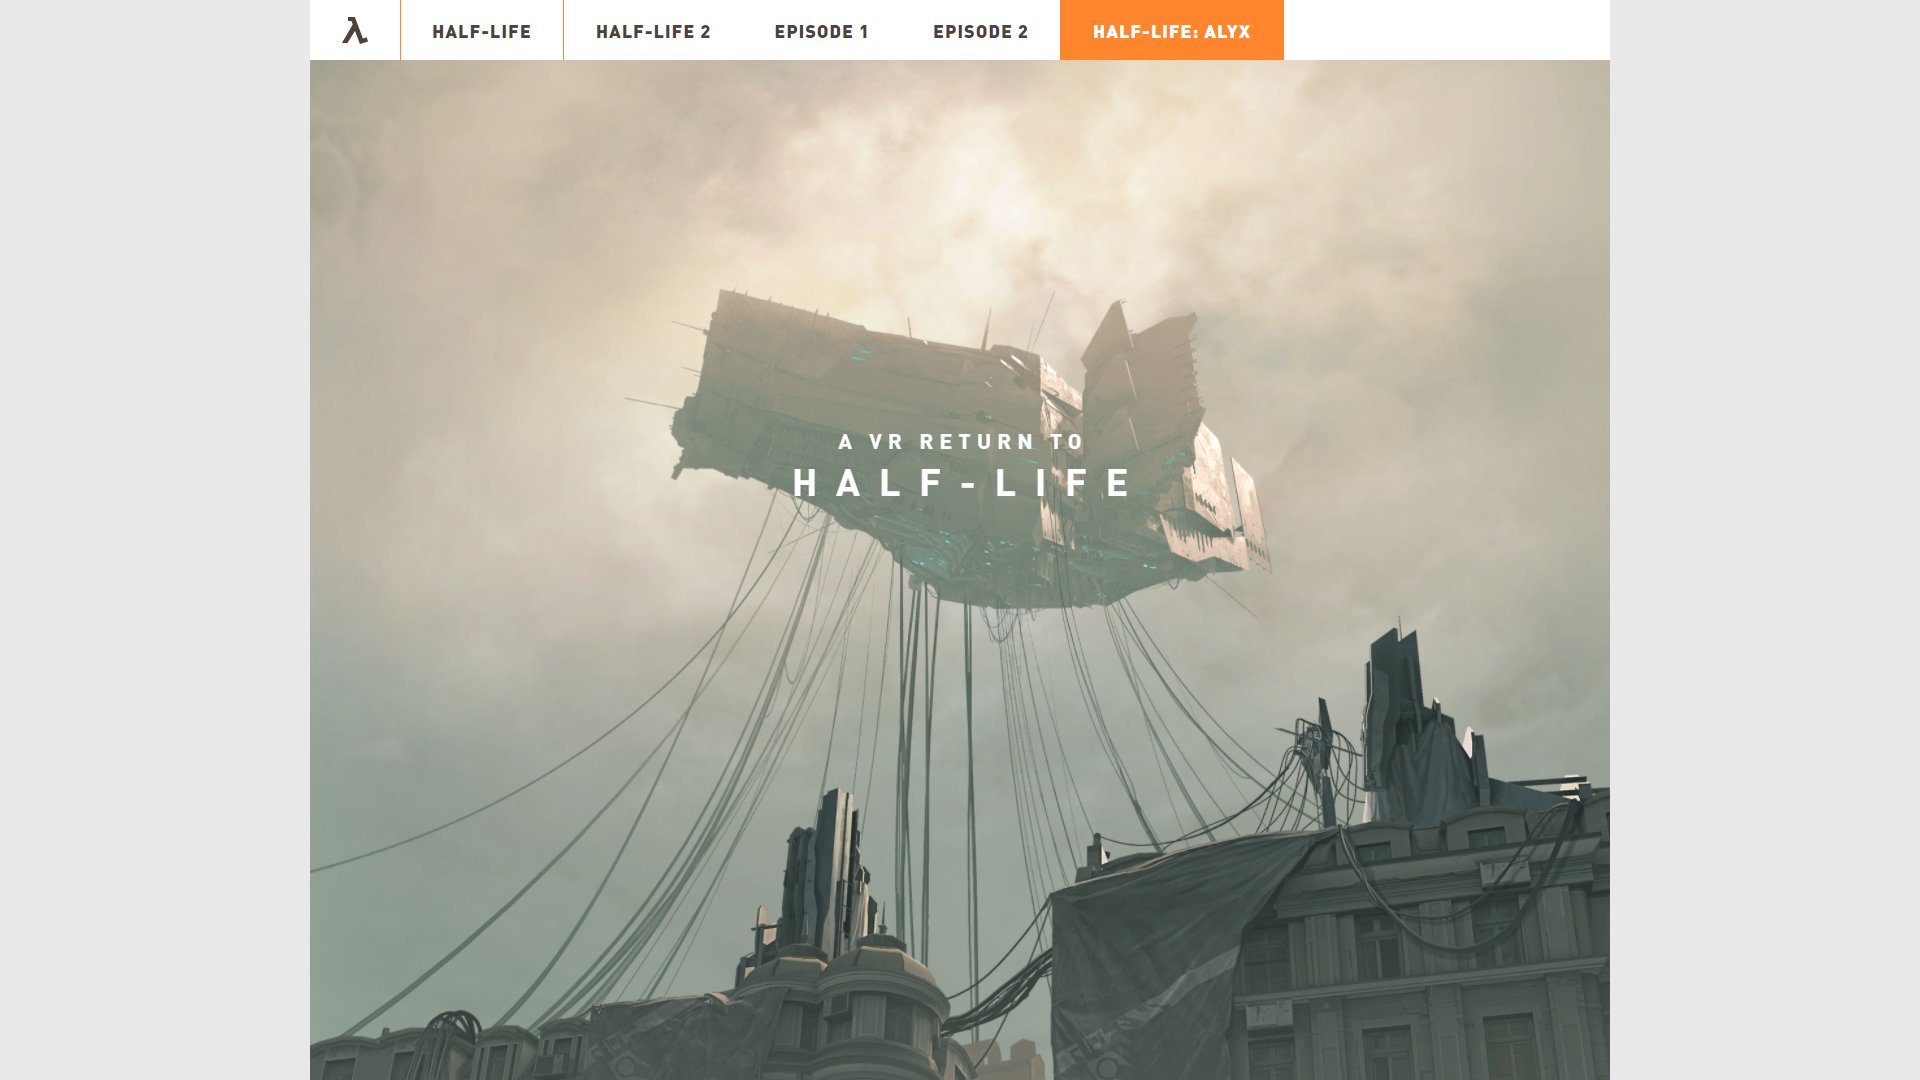 The Half-Life: Alyx page of the Half-Life website, circa November 2019 onwards. The site has a clean and minimalist layout with a simple menu listing the entire Half-Life series and a single column site design. Most of the page is a big concept art image of the Vault above the skyscrapers of Half-Life: Alyx's City Seventeen setting. A message in the middle of the screen declares it a VR return to Half-Life.